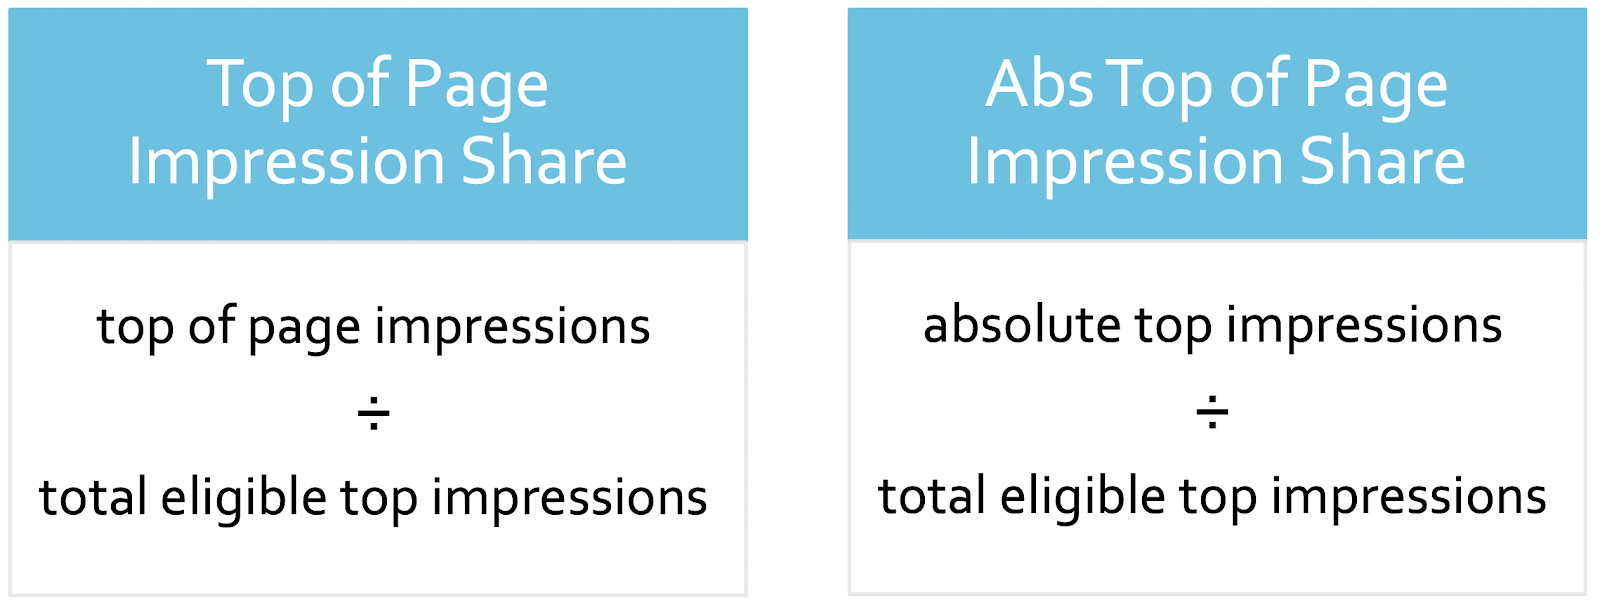 Image of Top of Page Impression Share and Absolute Top of Page Impression Share